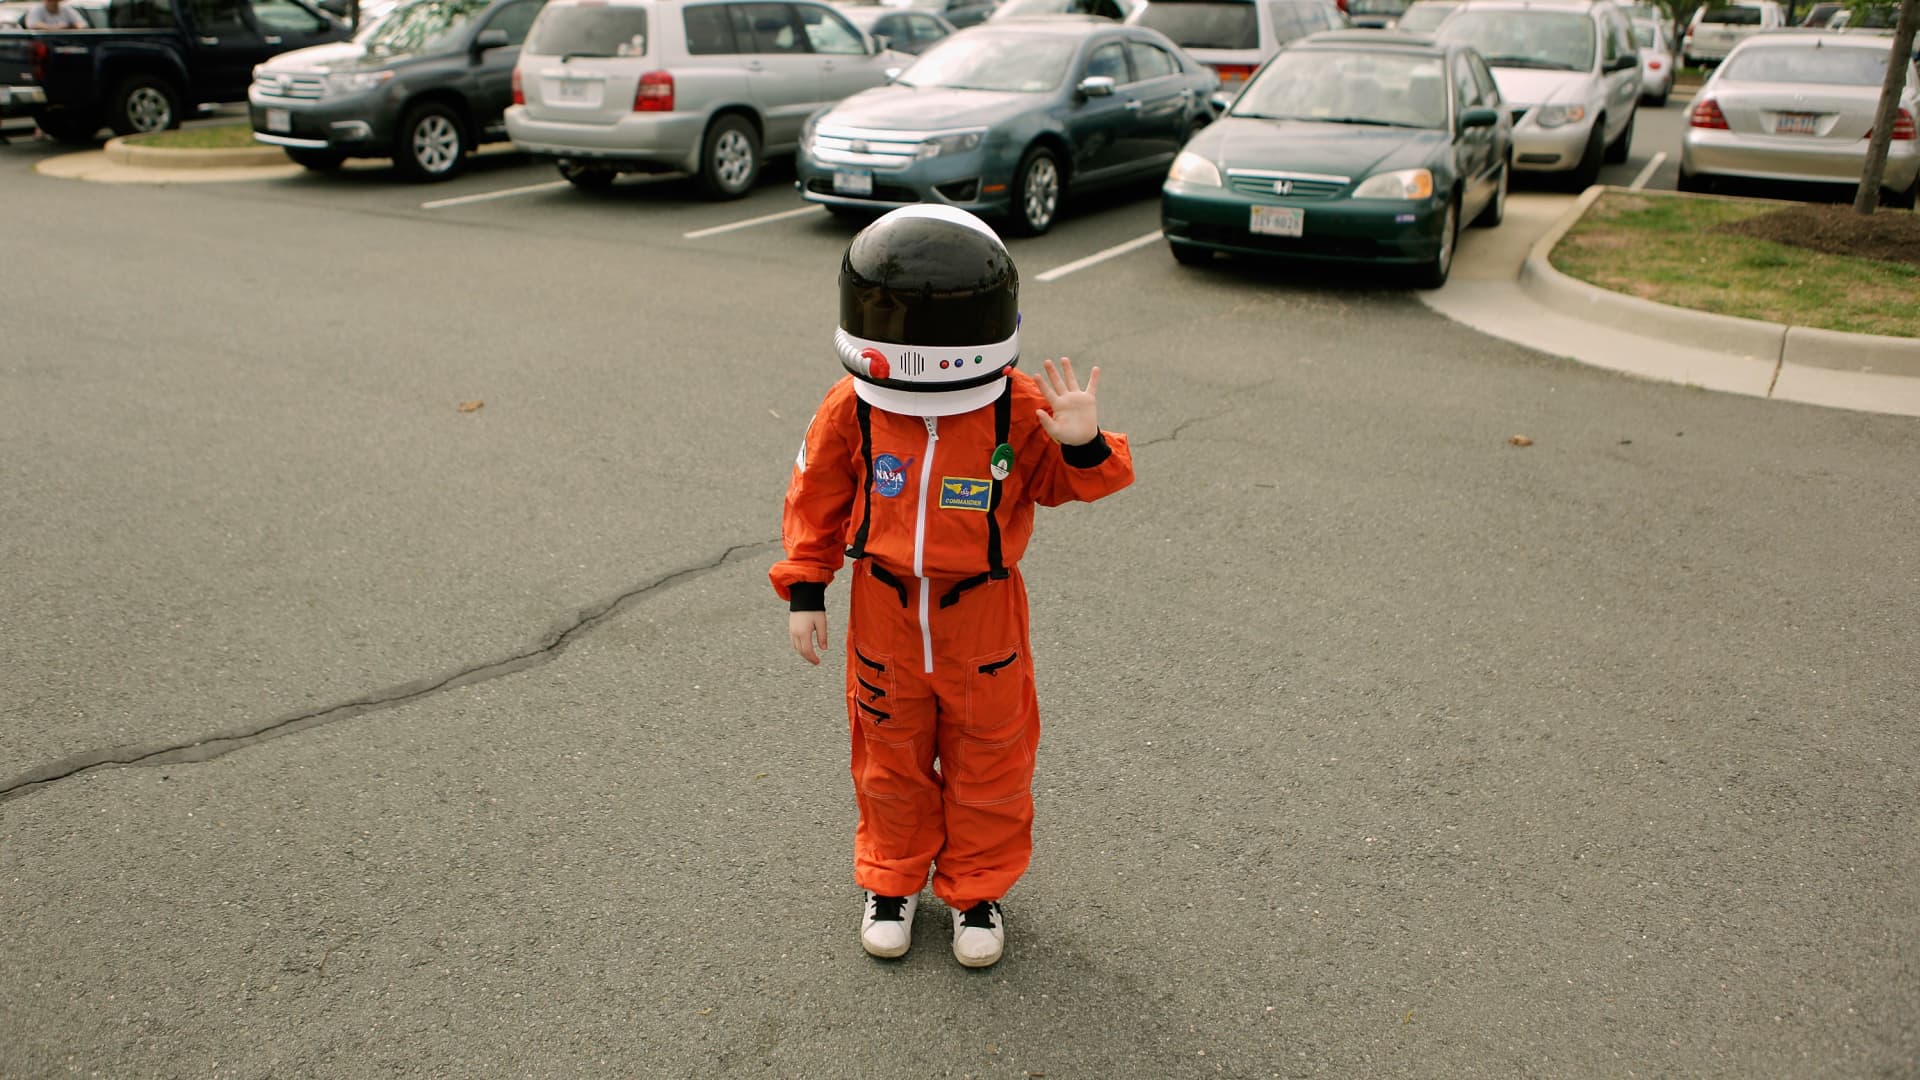 Kids now dream of being professional YouTubers rather than astronauts, study finds